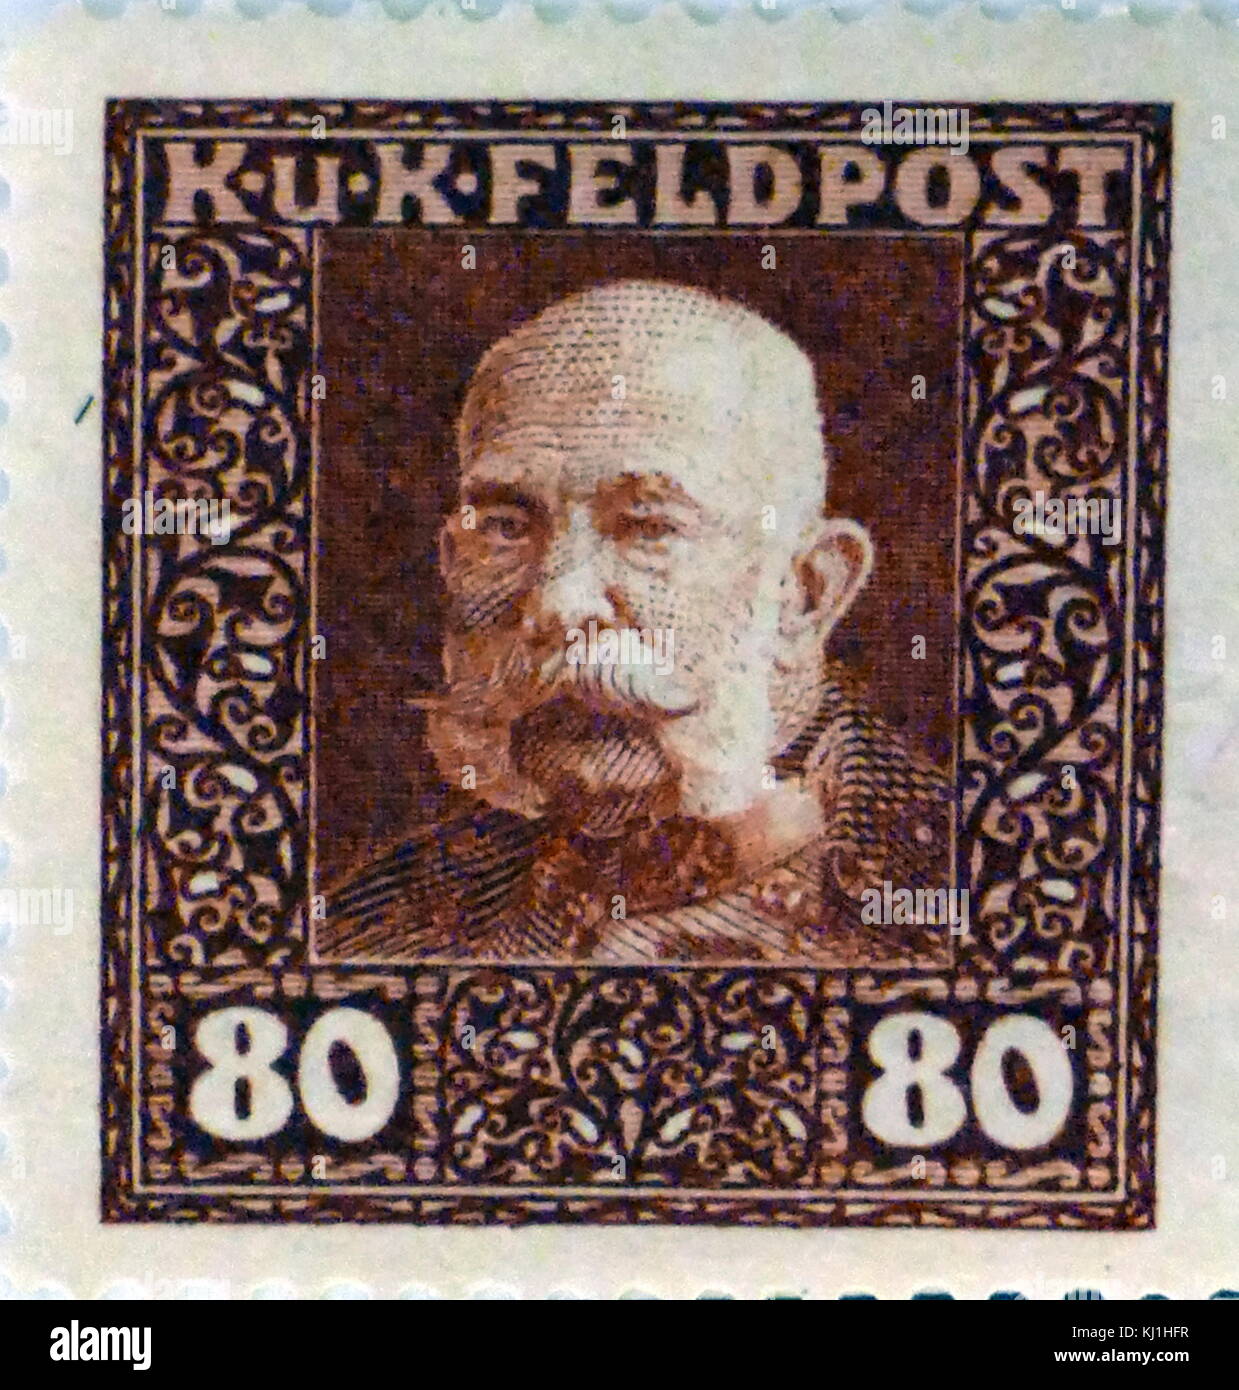 Austro-Hungarian stamp depicting, Franz Joseph I or Francis Joseph I (1830 – 1916) was Emperor of Austria and King of Hungary, Croatia and Bohemia from 2 December 1848 until his death on 21 November 1916. Stock Photo